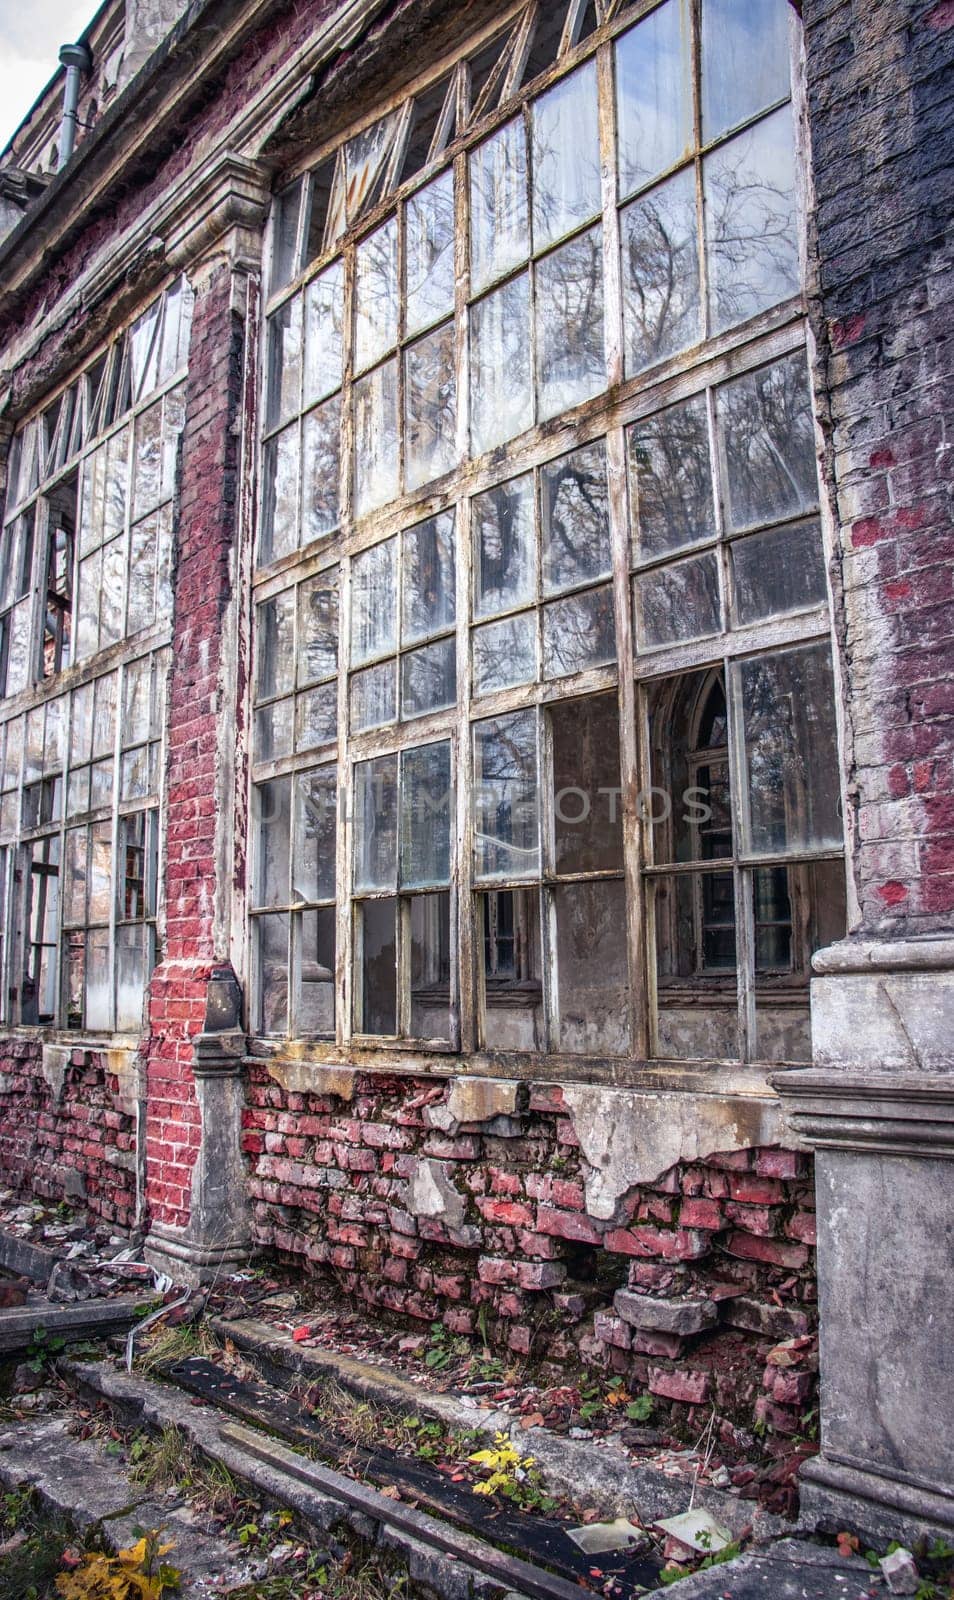 Old building with damaged windows concept photo. European towers. Architectural detail of ruined castle. Old doors, windows, balconies. Ukrainian moldings